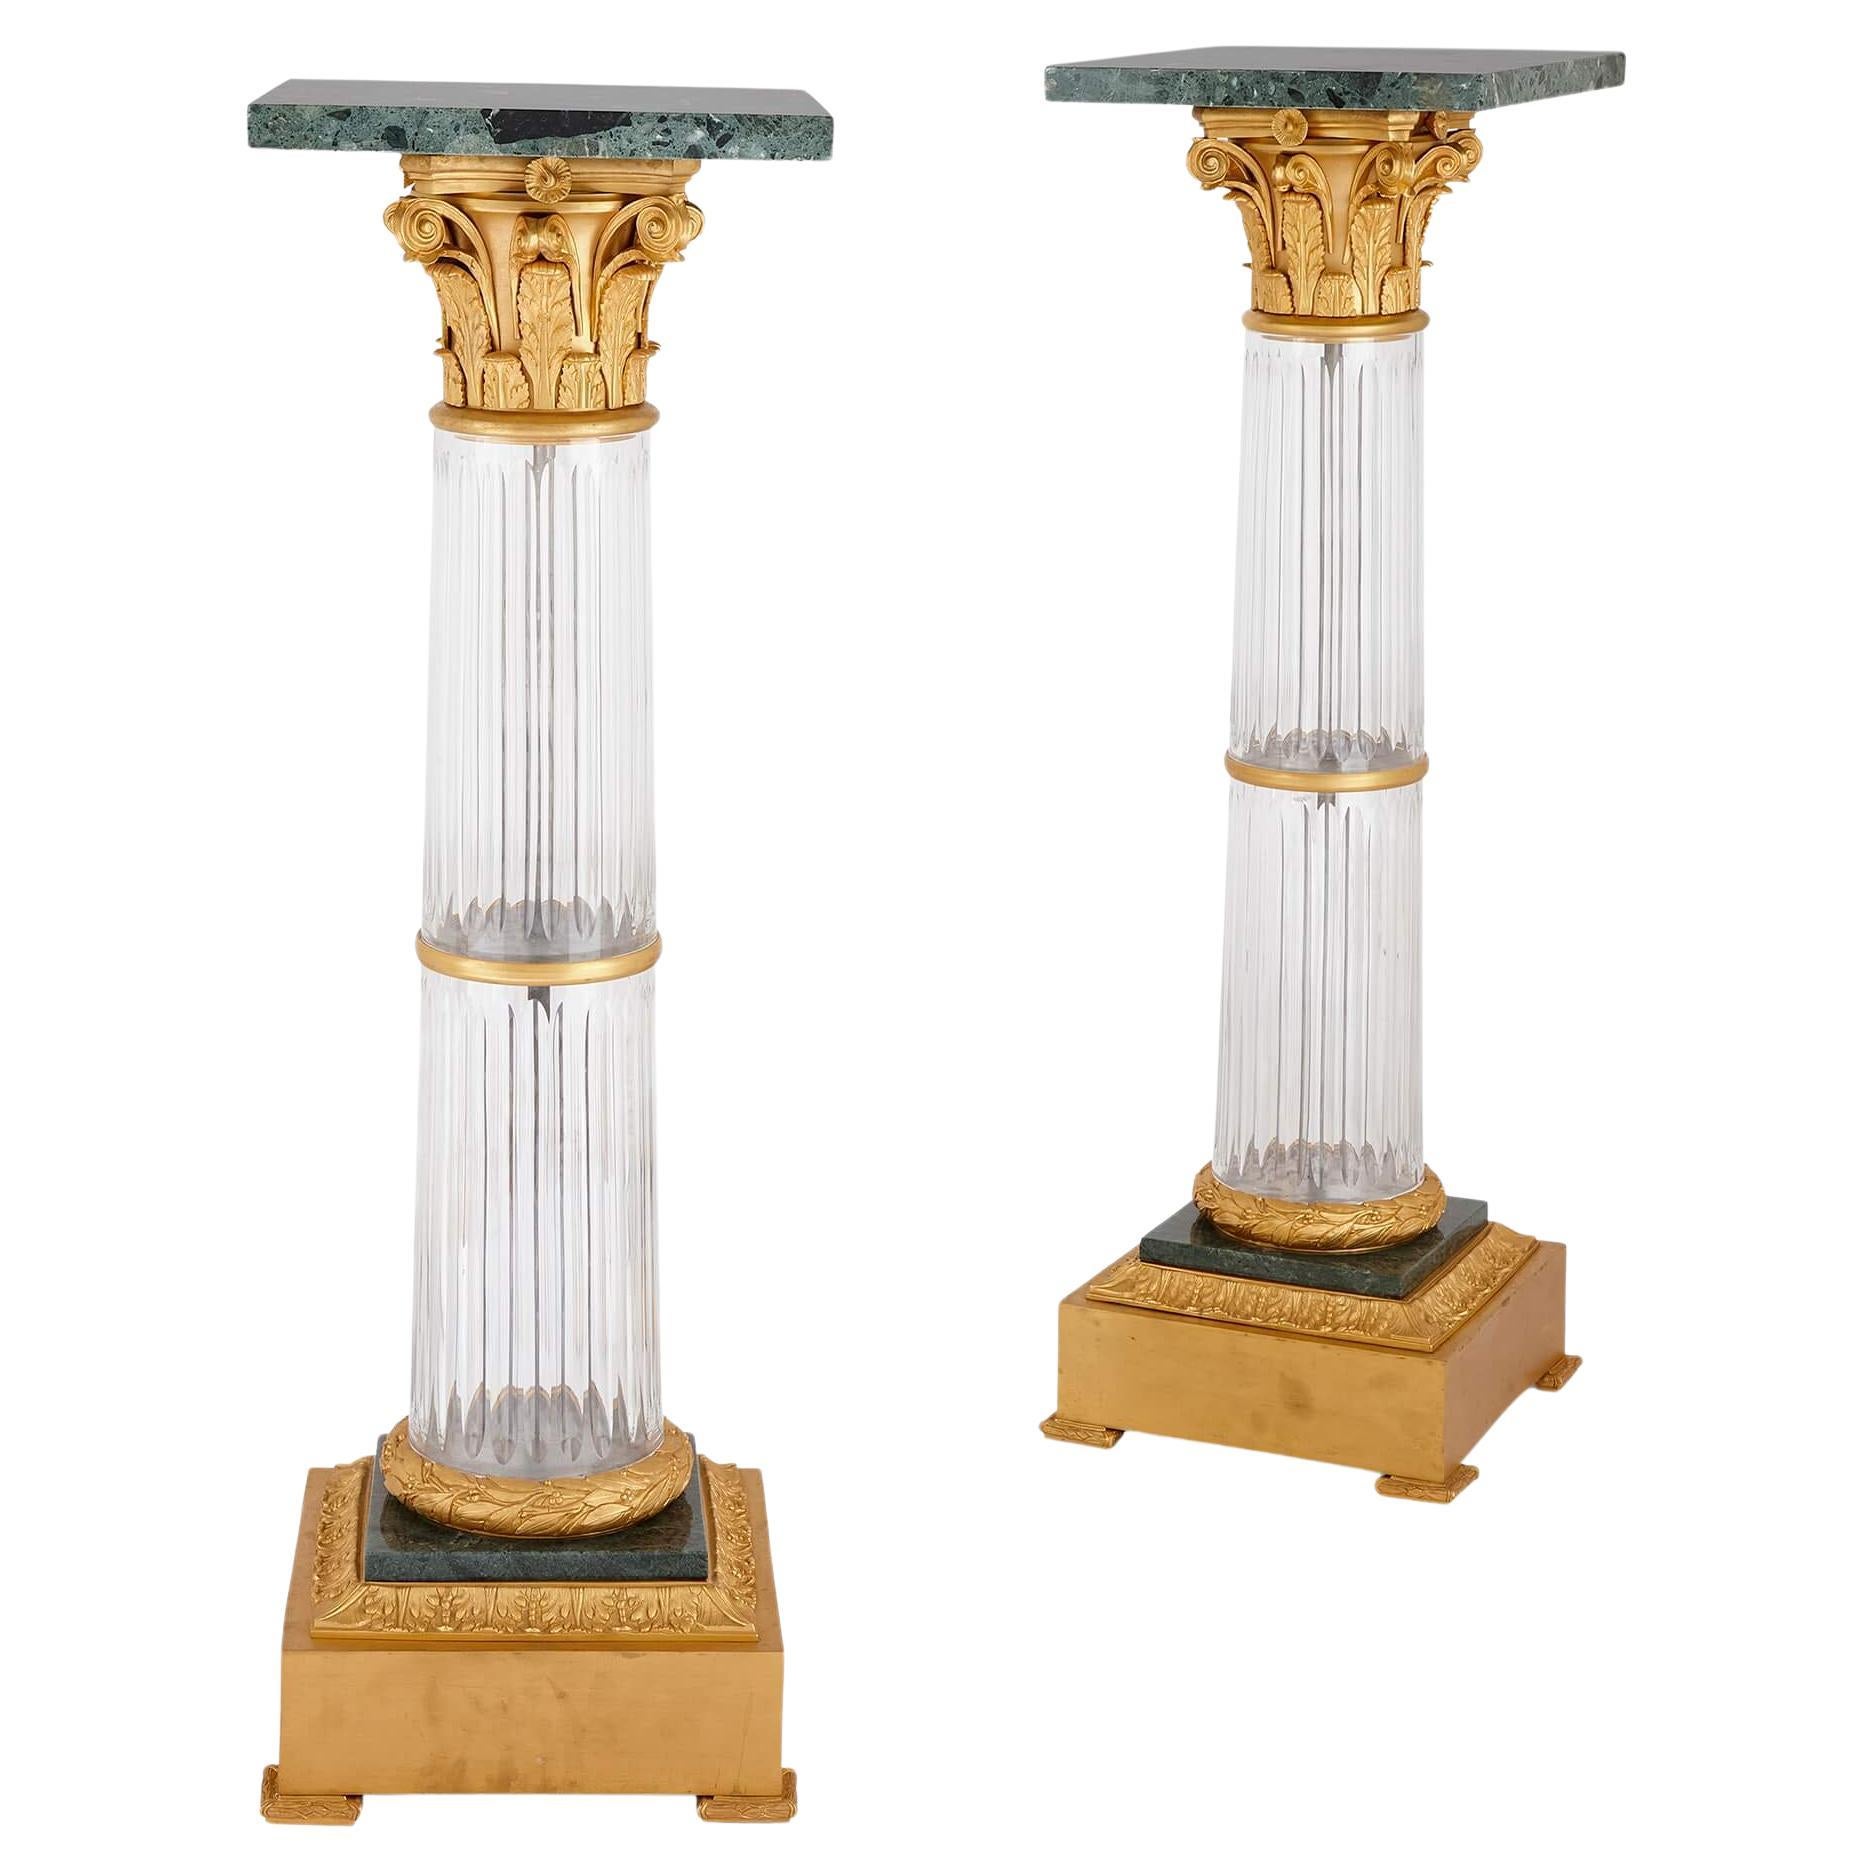 Pair of Large French Neoclassical Ormolu, Glass and Marble Pedestals